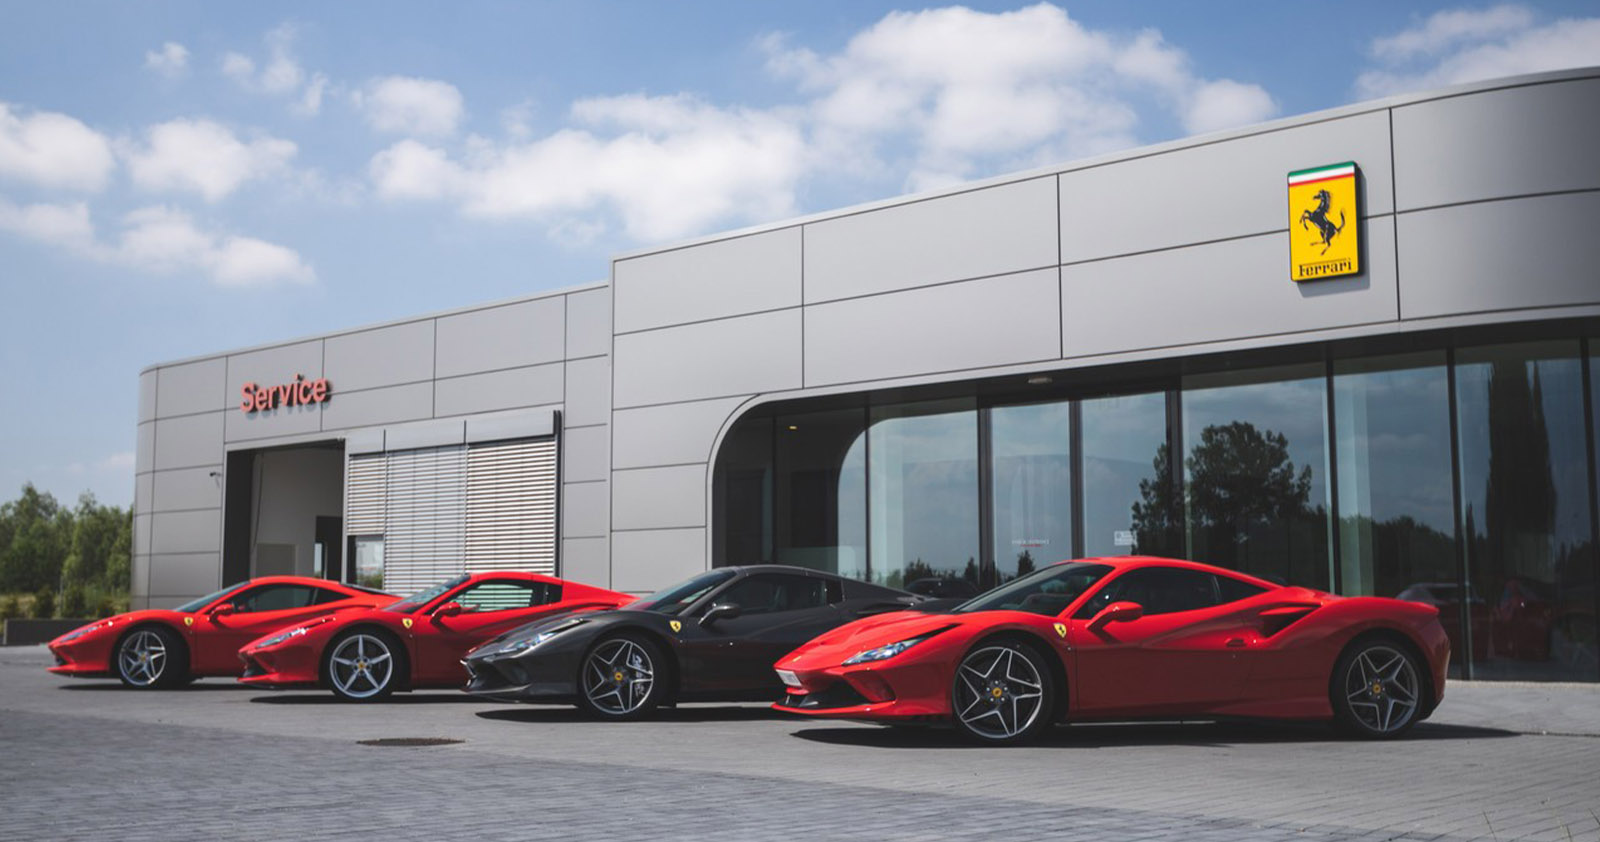 Ferraris at the front of a dealership